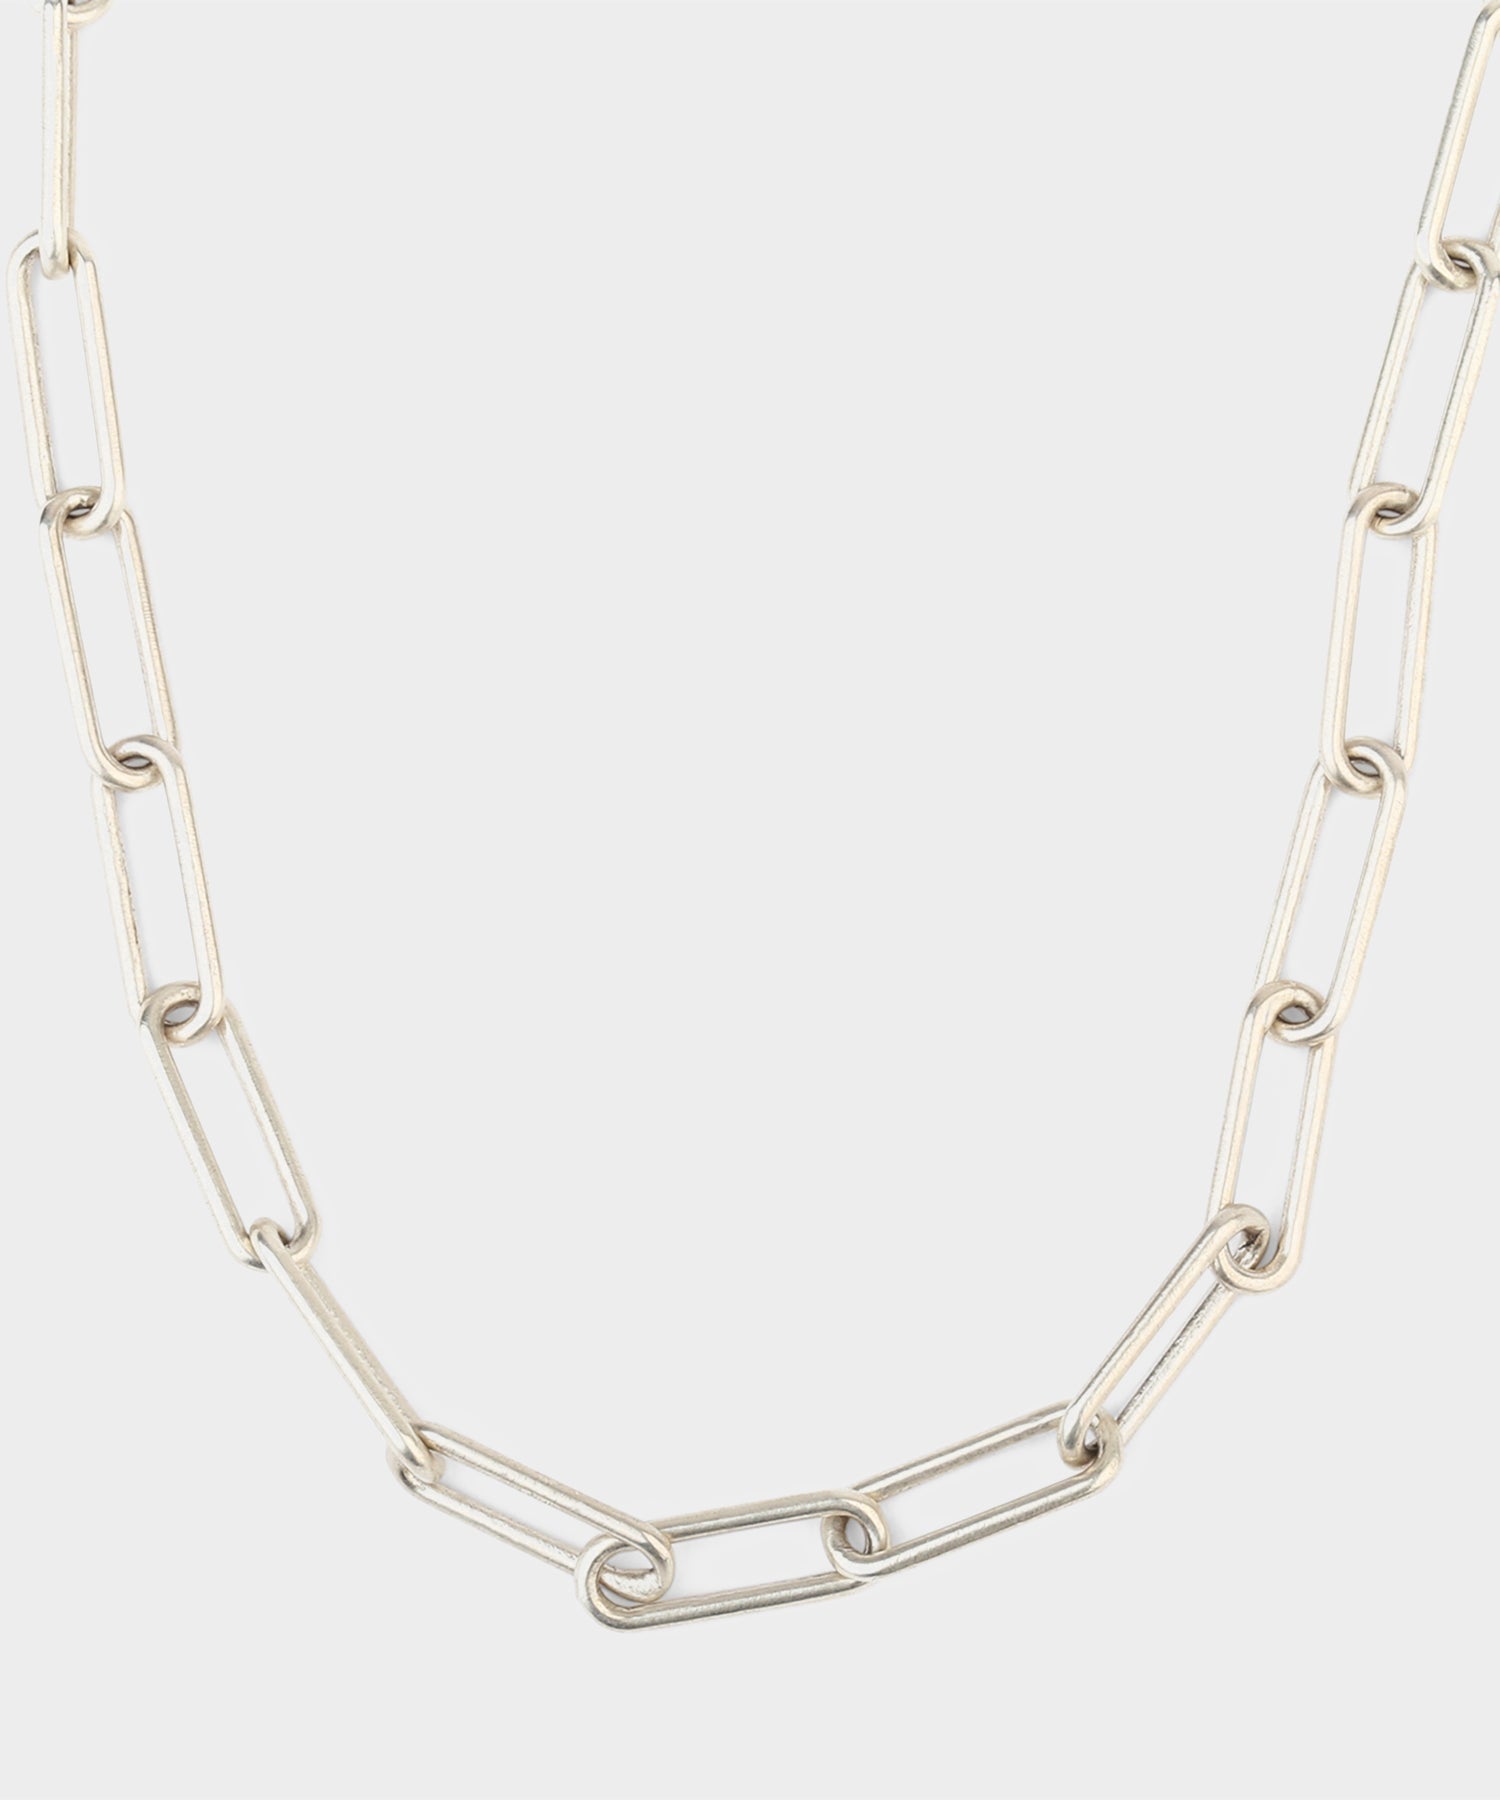 M. Cohen Ovalado Necklace in Sterling Silver